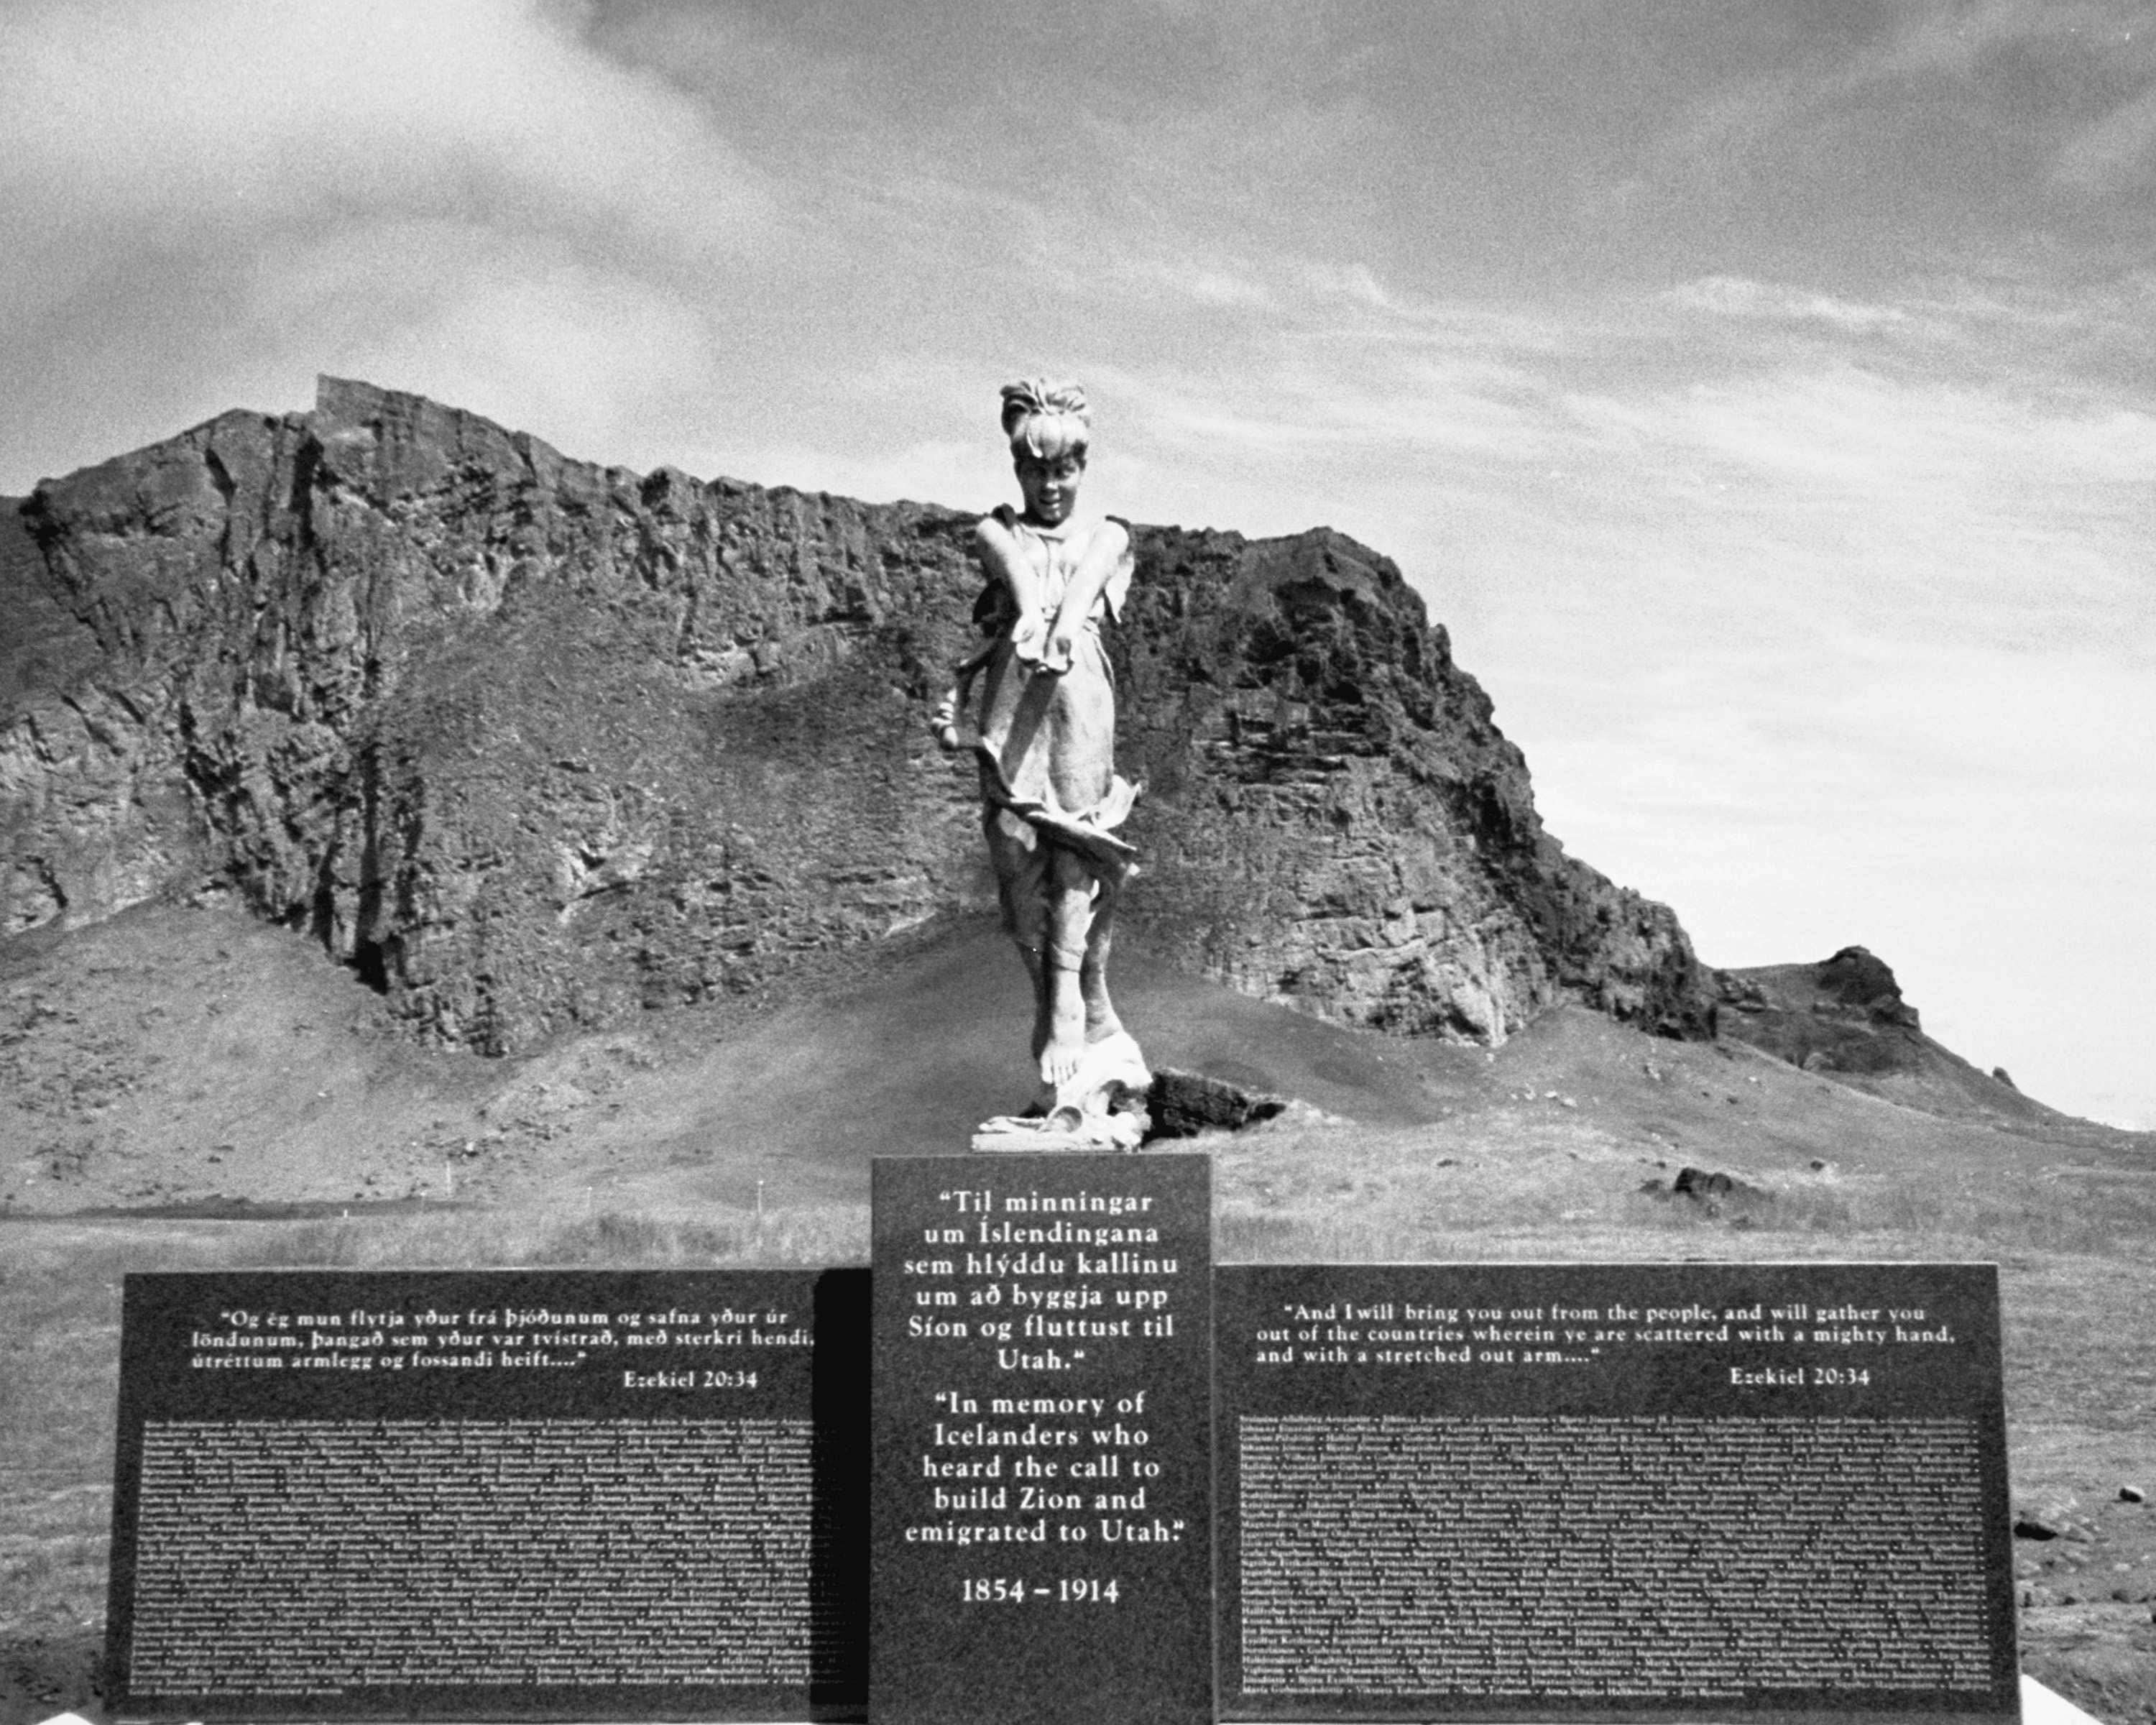 The monument at Westmann Island, which was dedicated on June 30, 2000. Courtesy of David A. Ashby